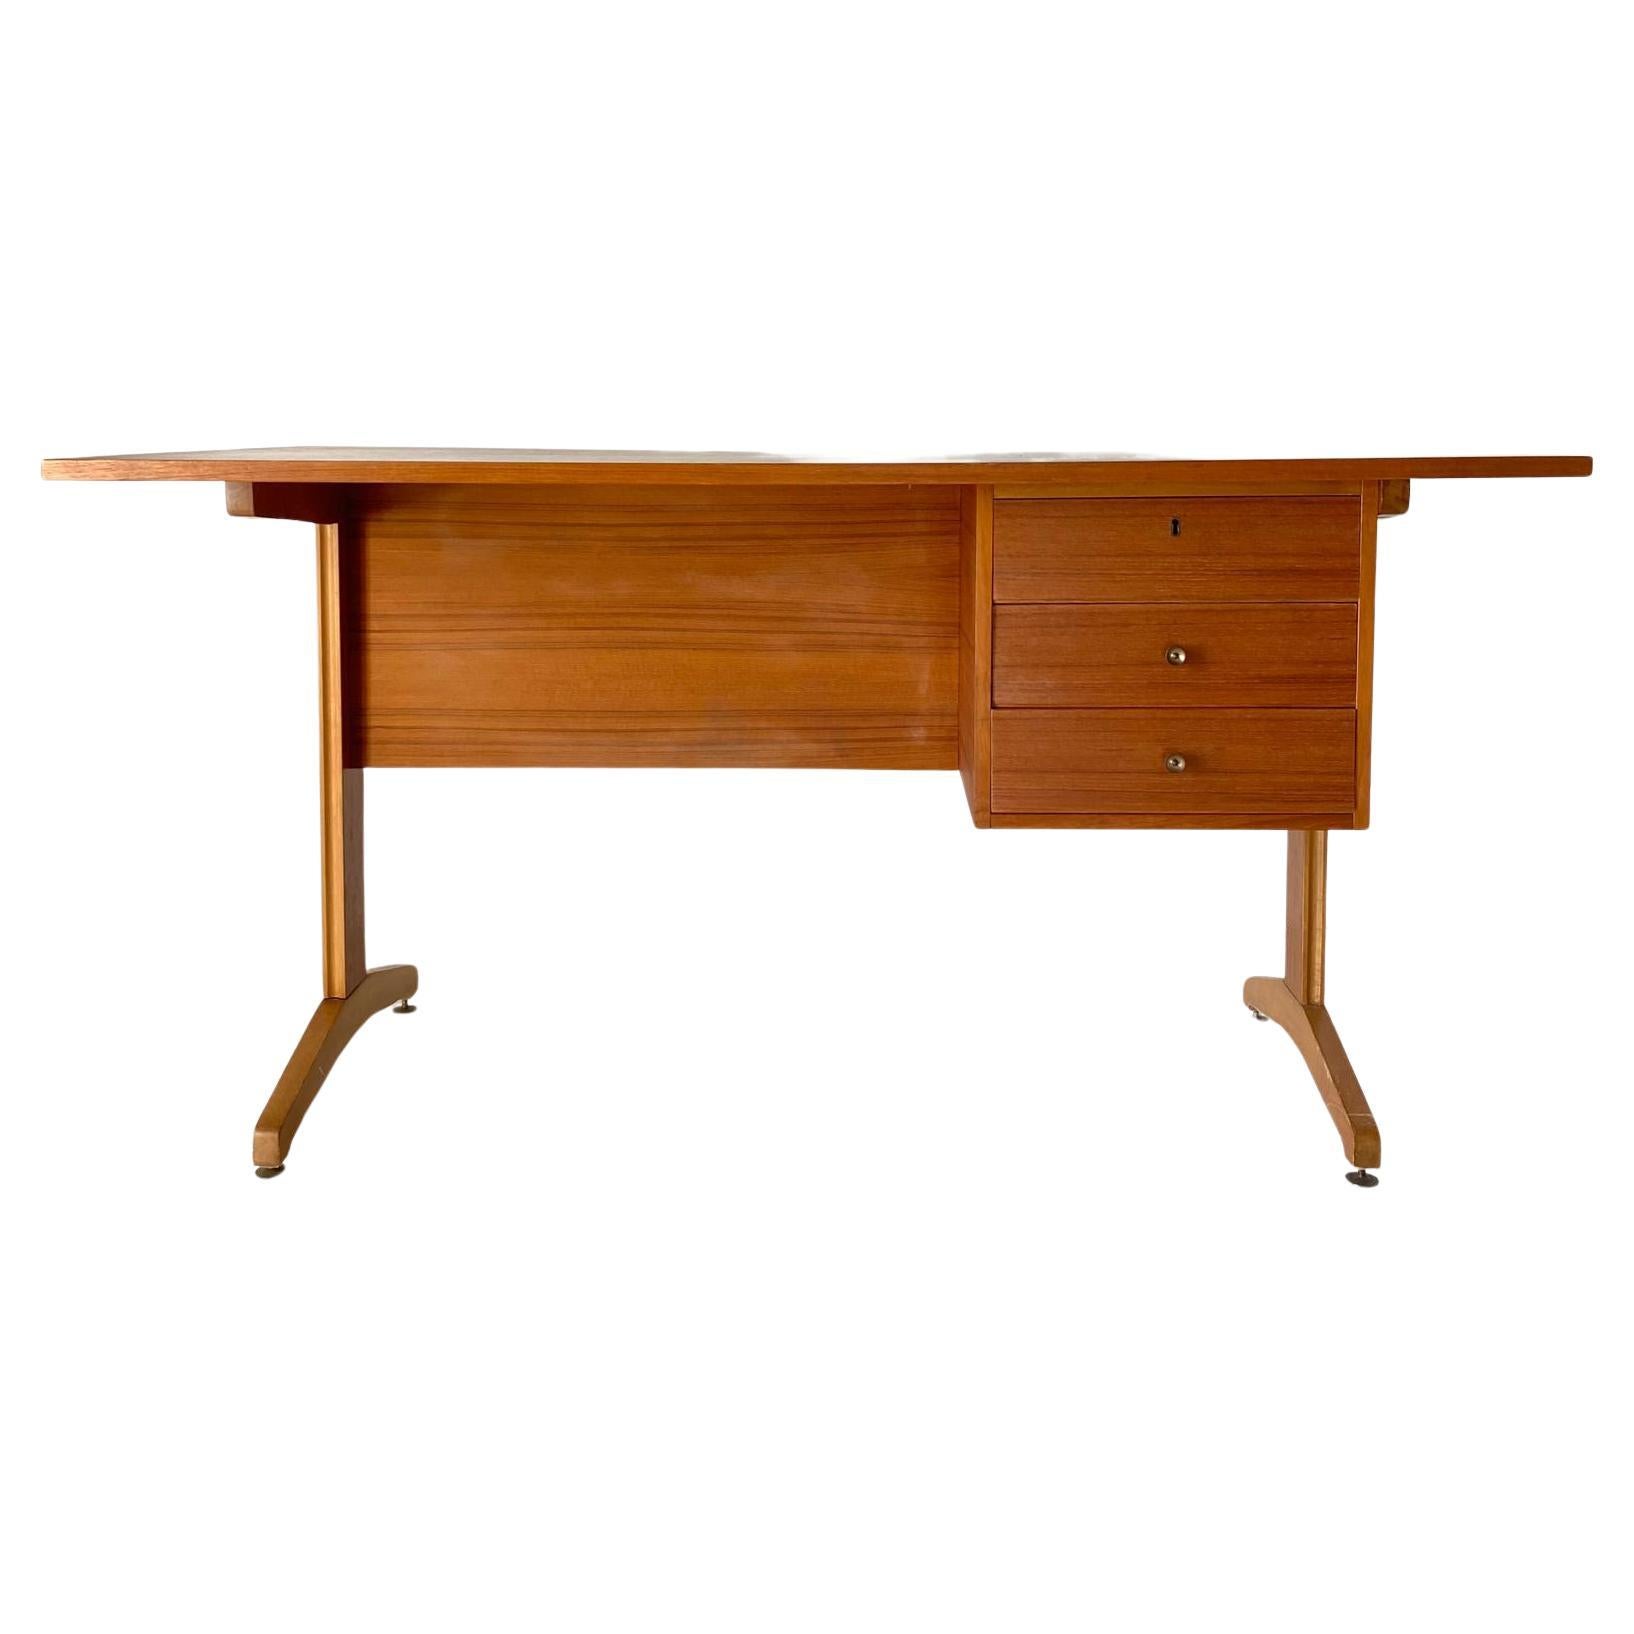 Vintage desk, Italy 1960s in the style of Gianfranco Frattini.
A beautiful italian desk with teak wood top and structure and cherry wood feet. 

Very stylish piece of design from the 1960s with side drawers underneath the top. Curved cherry wood